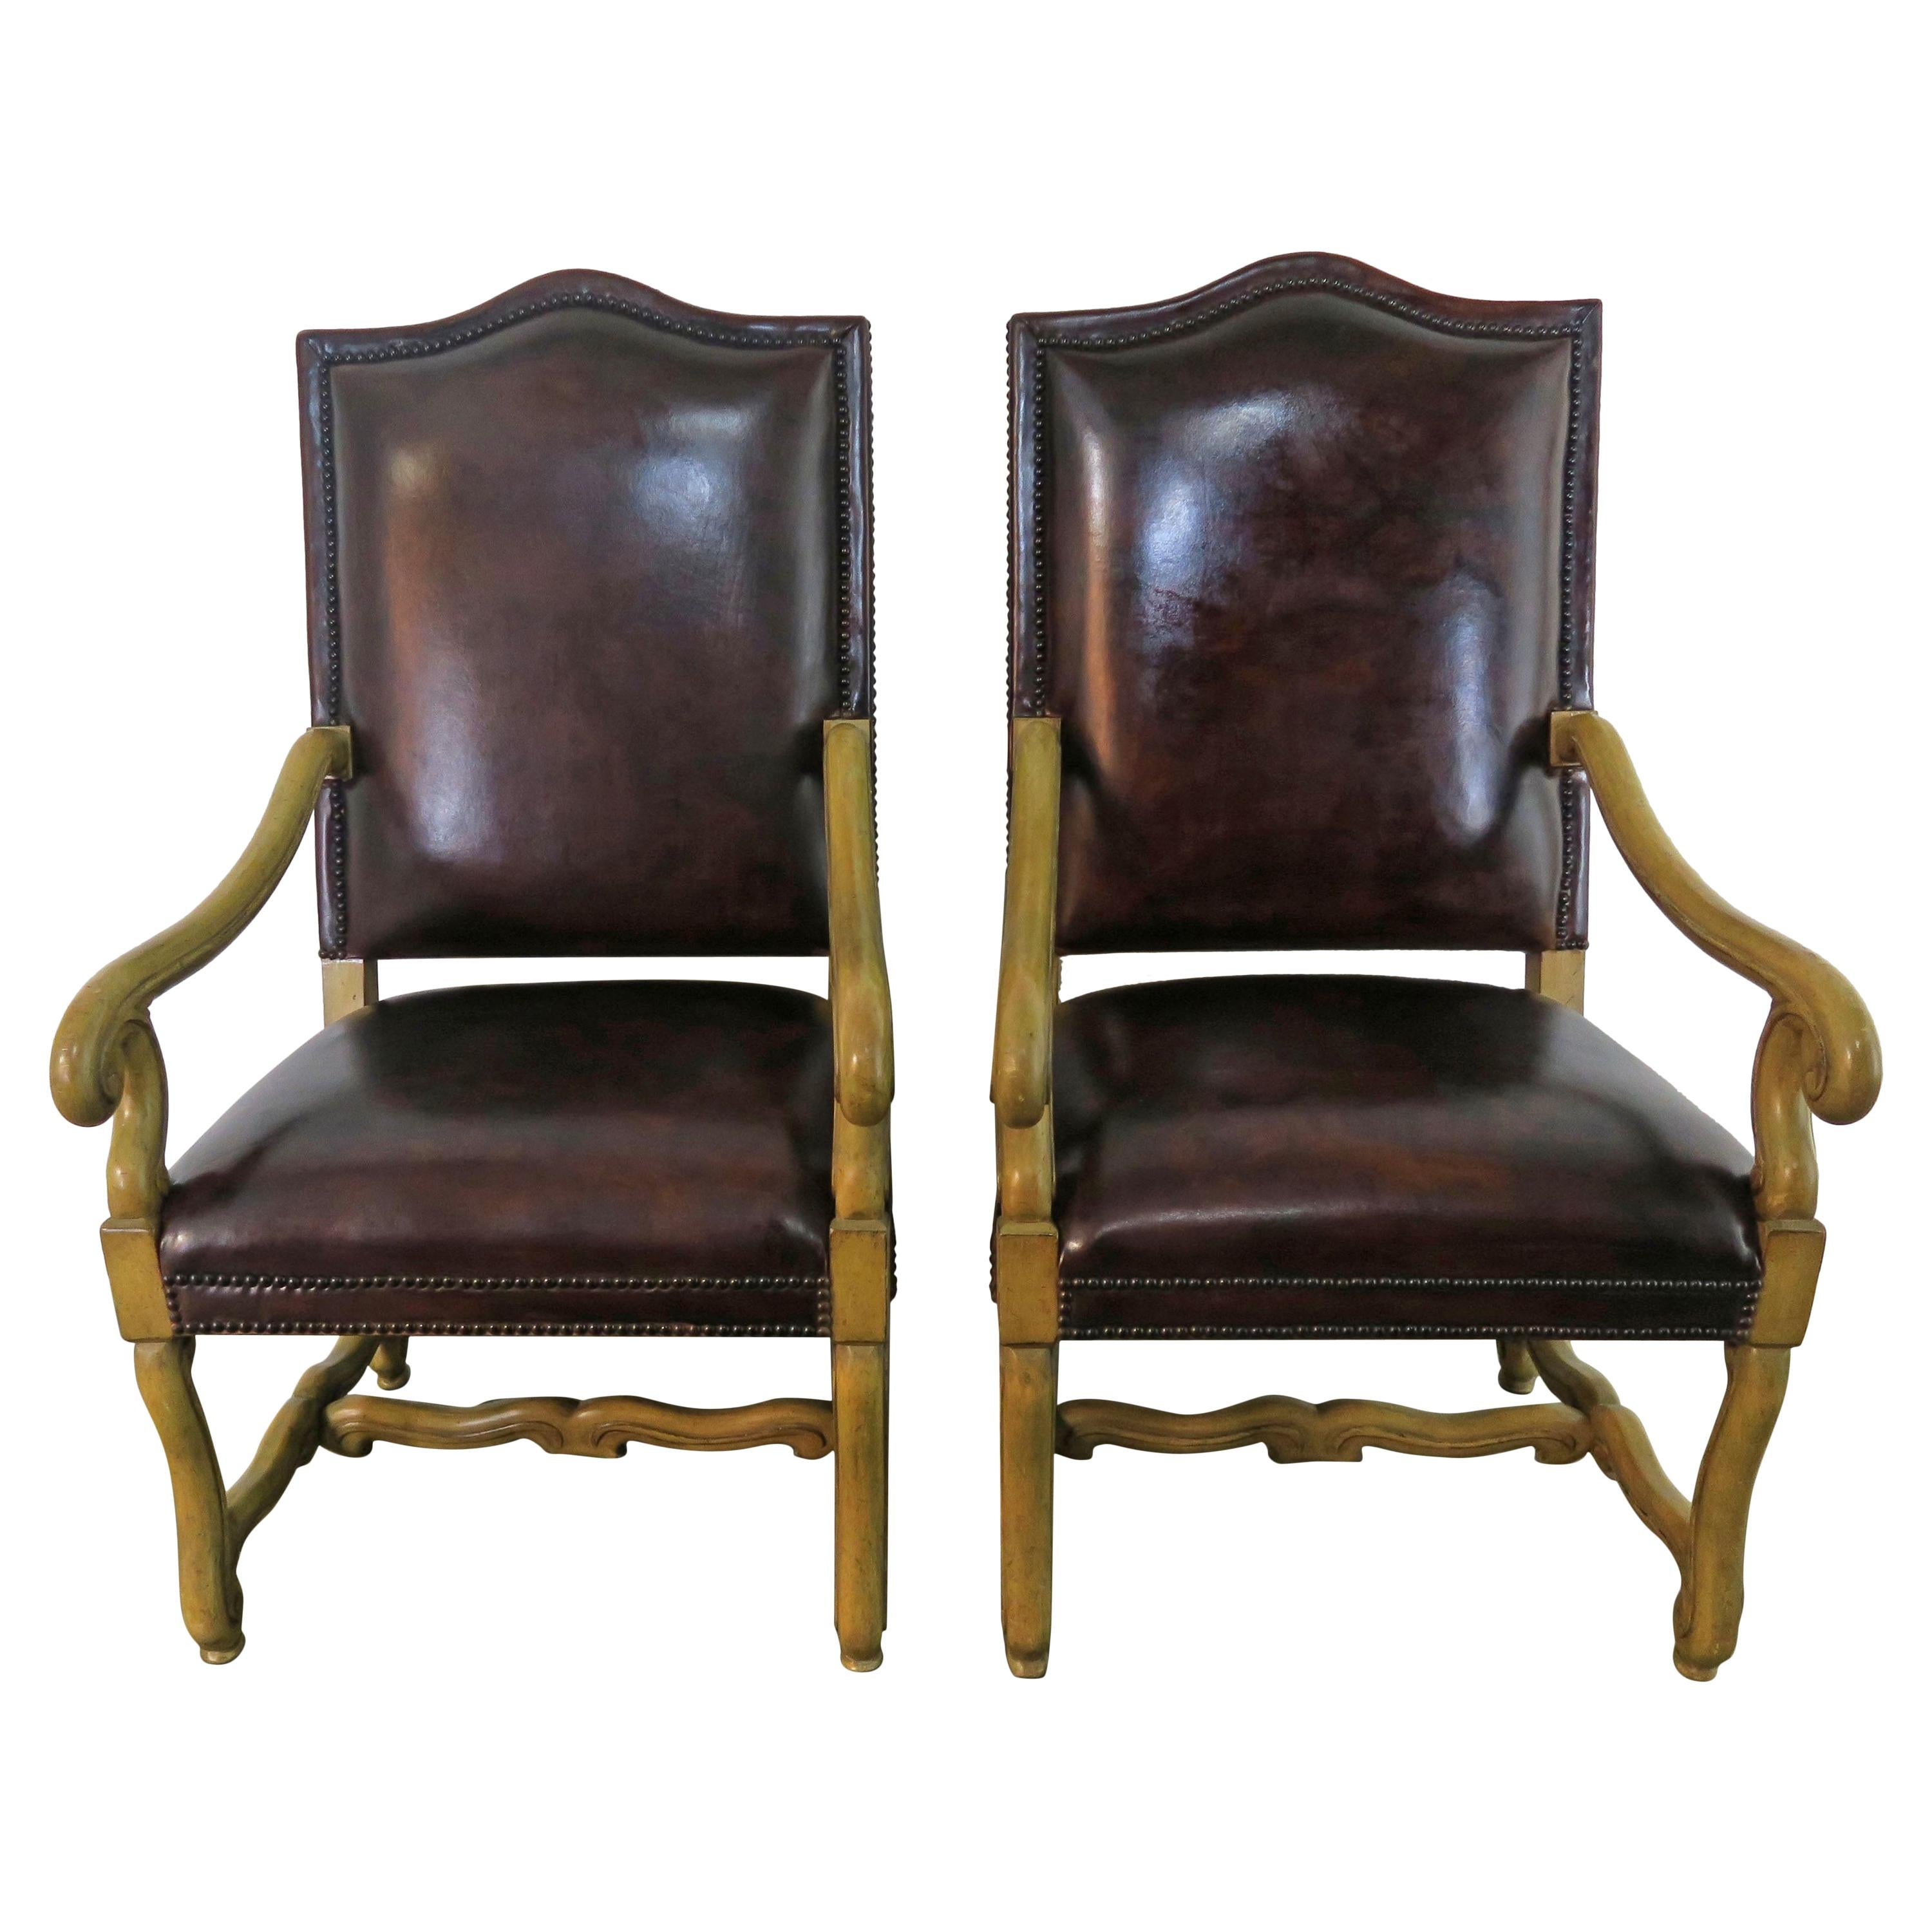 Italian Tuscan Style Leather Upholstered Armchairs, Pair